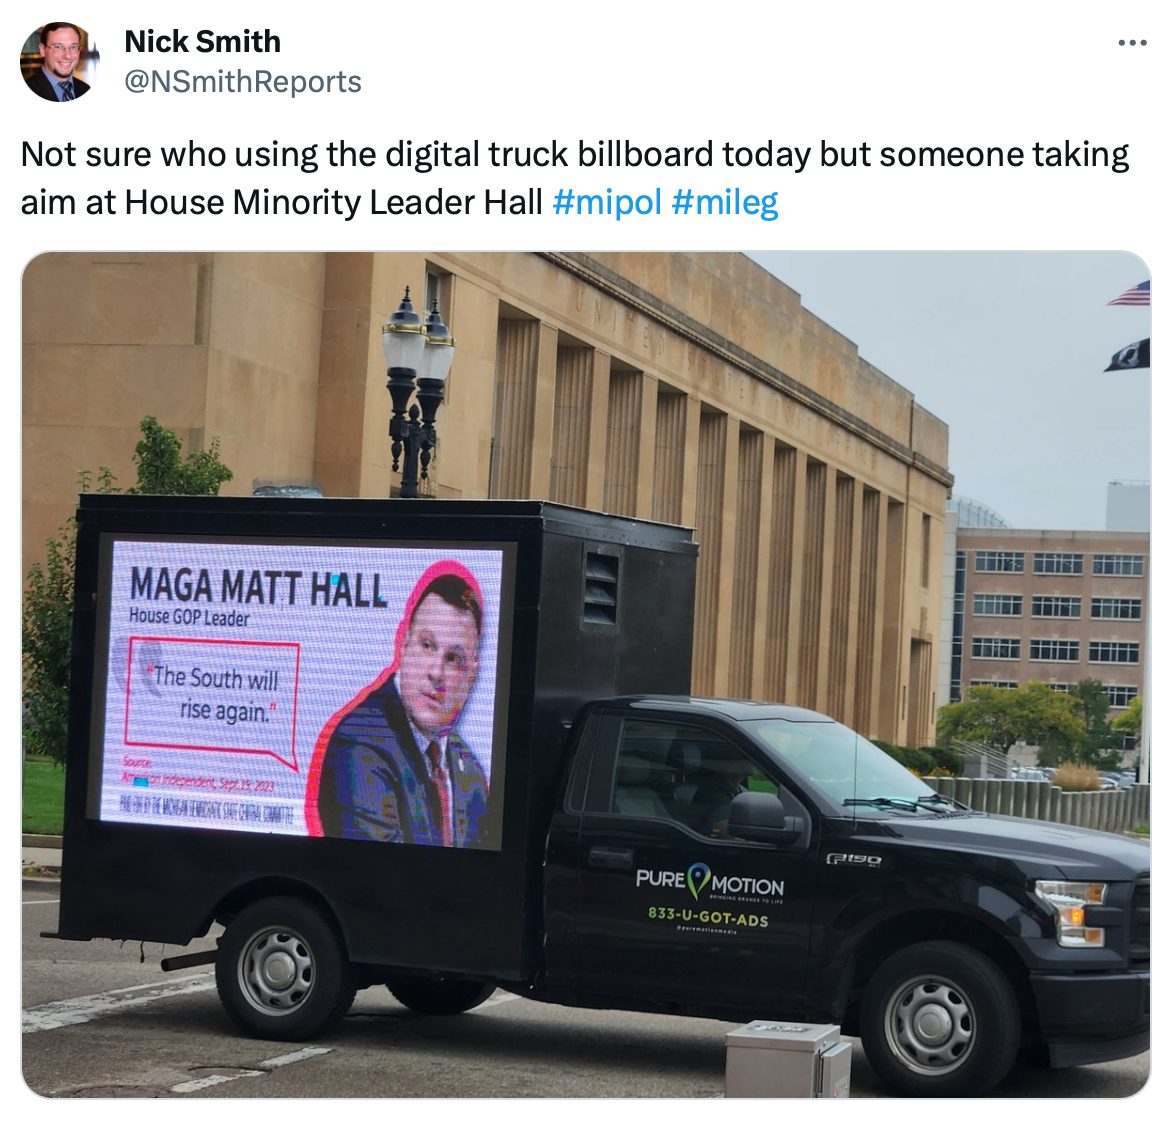 Nick Smith tweet about the mobile billboard ads attacking MAGA Matt Hall